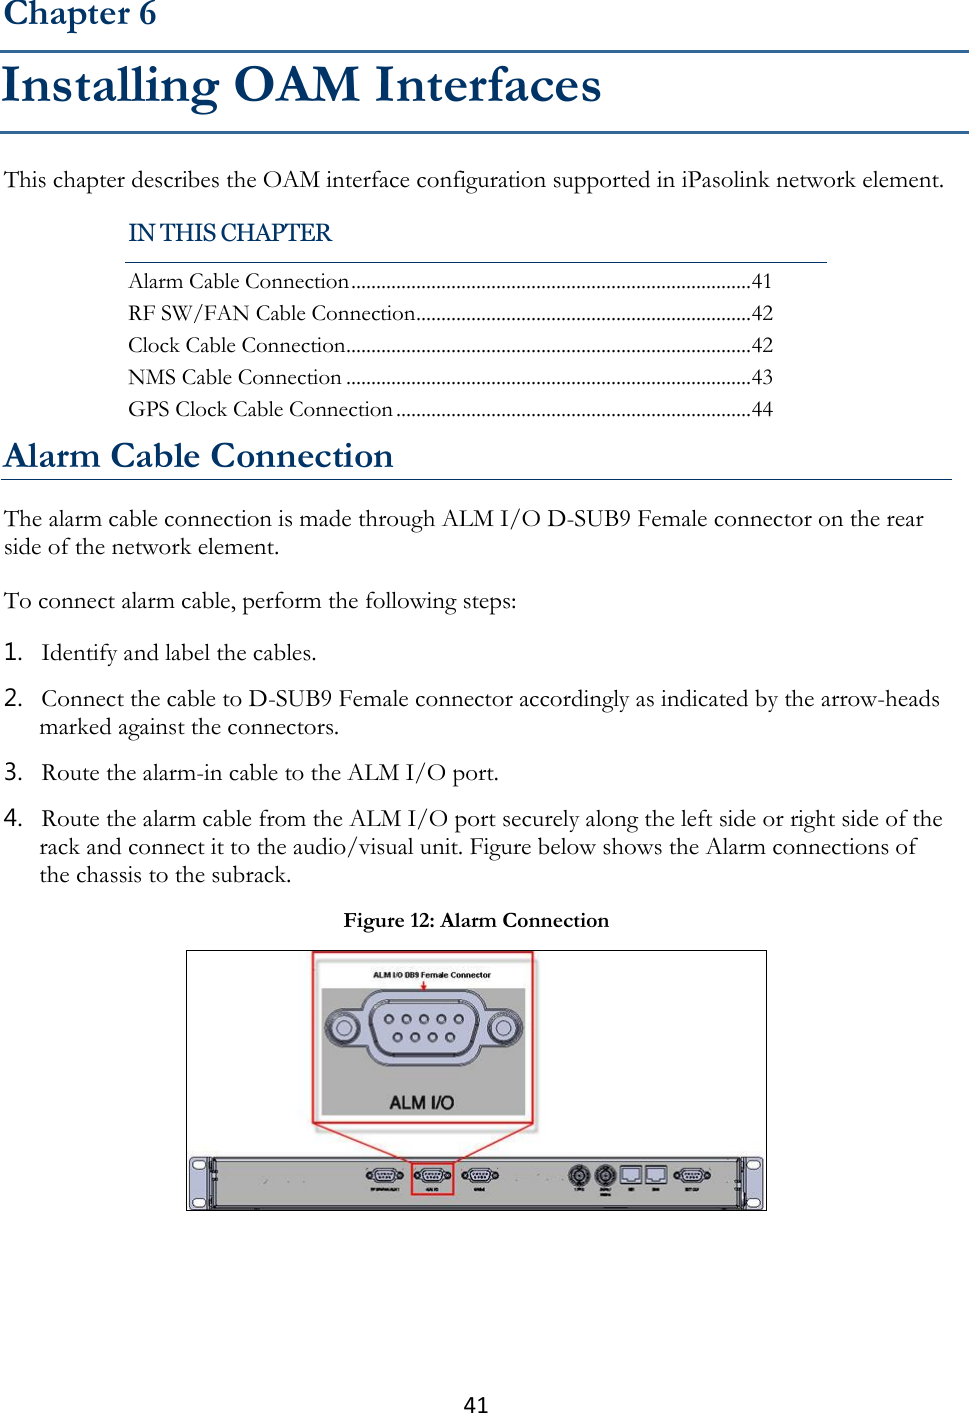 41  This chapter describes the OAM interface configuration supported in iPasolink network element. Alarm Cable Connection The alarm cable connection is made through ALM I/O D-SUB9 Female connector on the rear side of the network element. To connect alarm cable, perform the following steps: 1. Identify and label the cables. 2. Connect the cable to D-SUB9 Female connector accordingly as indicated by the arrow-heads marked against the connectors. 3. Route the alarm-in cable to the ALM I/O port. 4. Route the alarm cable from the ALM I/O port securely along the left side or right side of the rack and connect it to the audio/visual unit. Figure below shows the Alarm connections of the chassis to the subrack.  Chapter 6 Installing OAM Interfaces IN THIS CHAPTER Alarm Cable Connection ................................................................................ 41 RF SW/FAN Cable Connection ................................................................... 42 Clock Cable Connection ................................................................................. 42 NMS Cable Connection ................................................................................. 43 GPS Clock Cable Connection ....................................................................... 44 Figure 12: Alarm Connection  